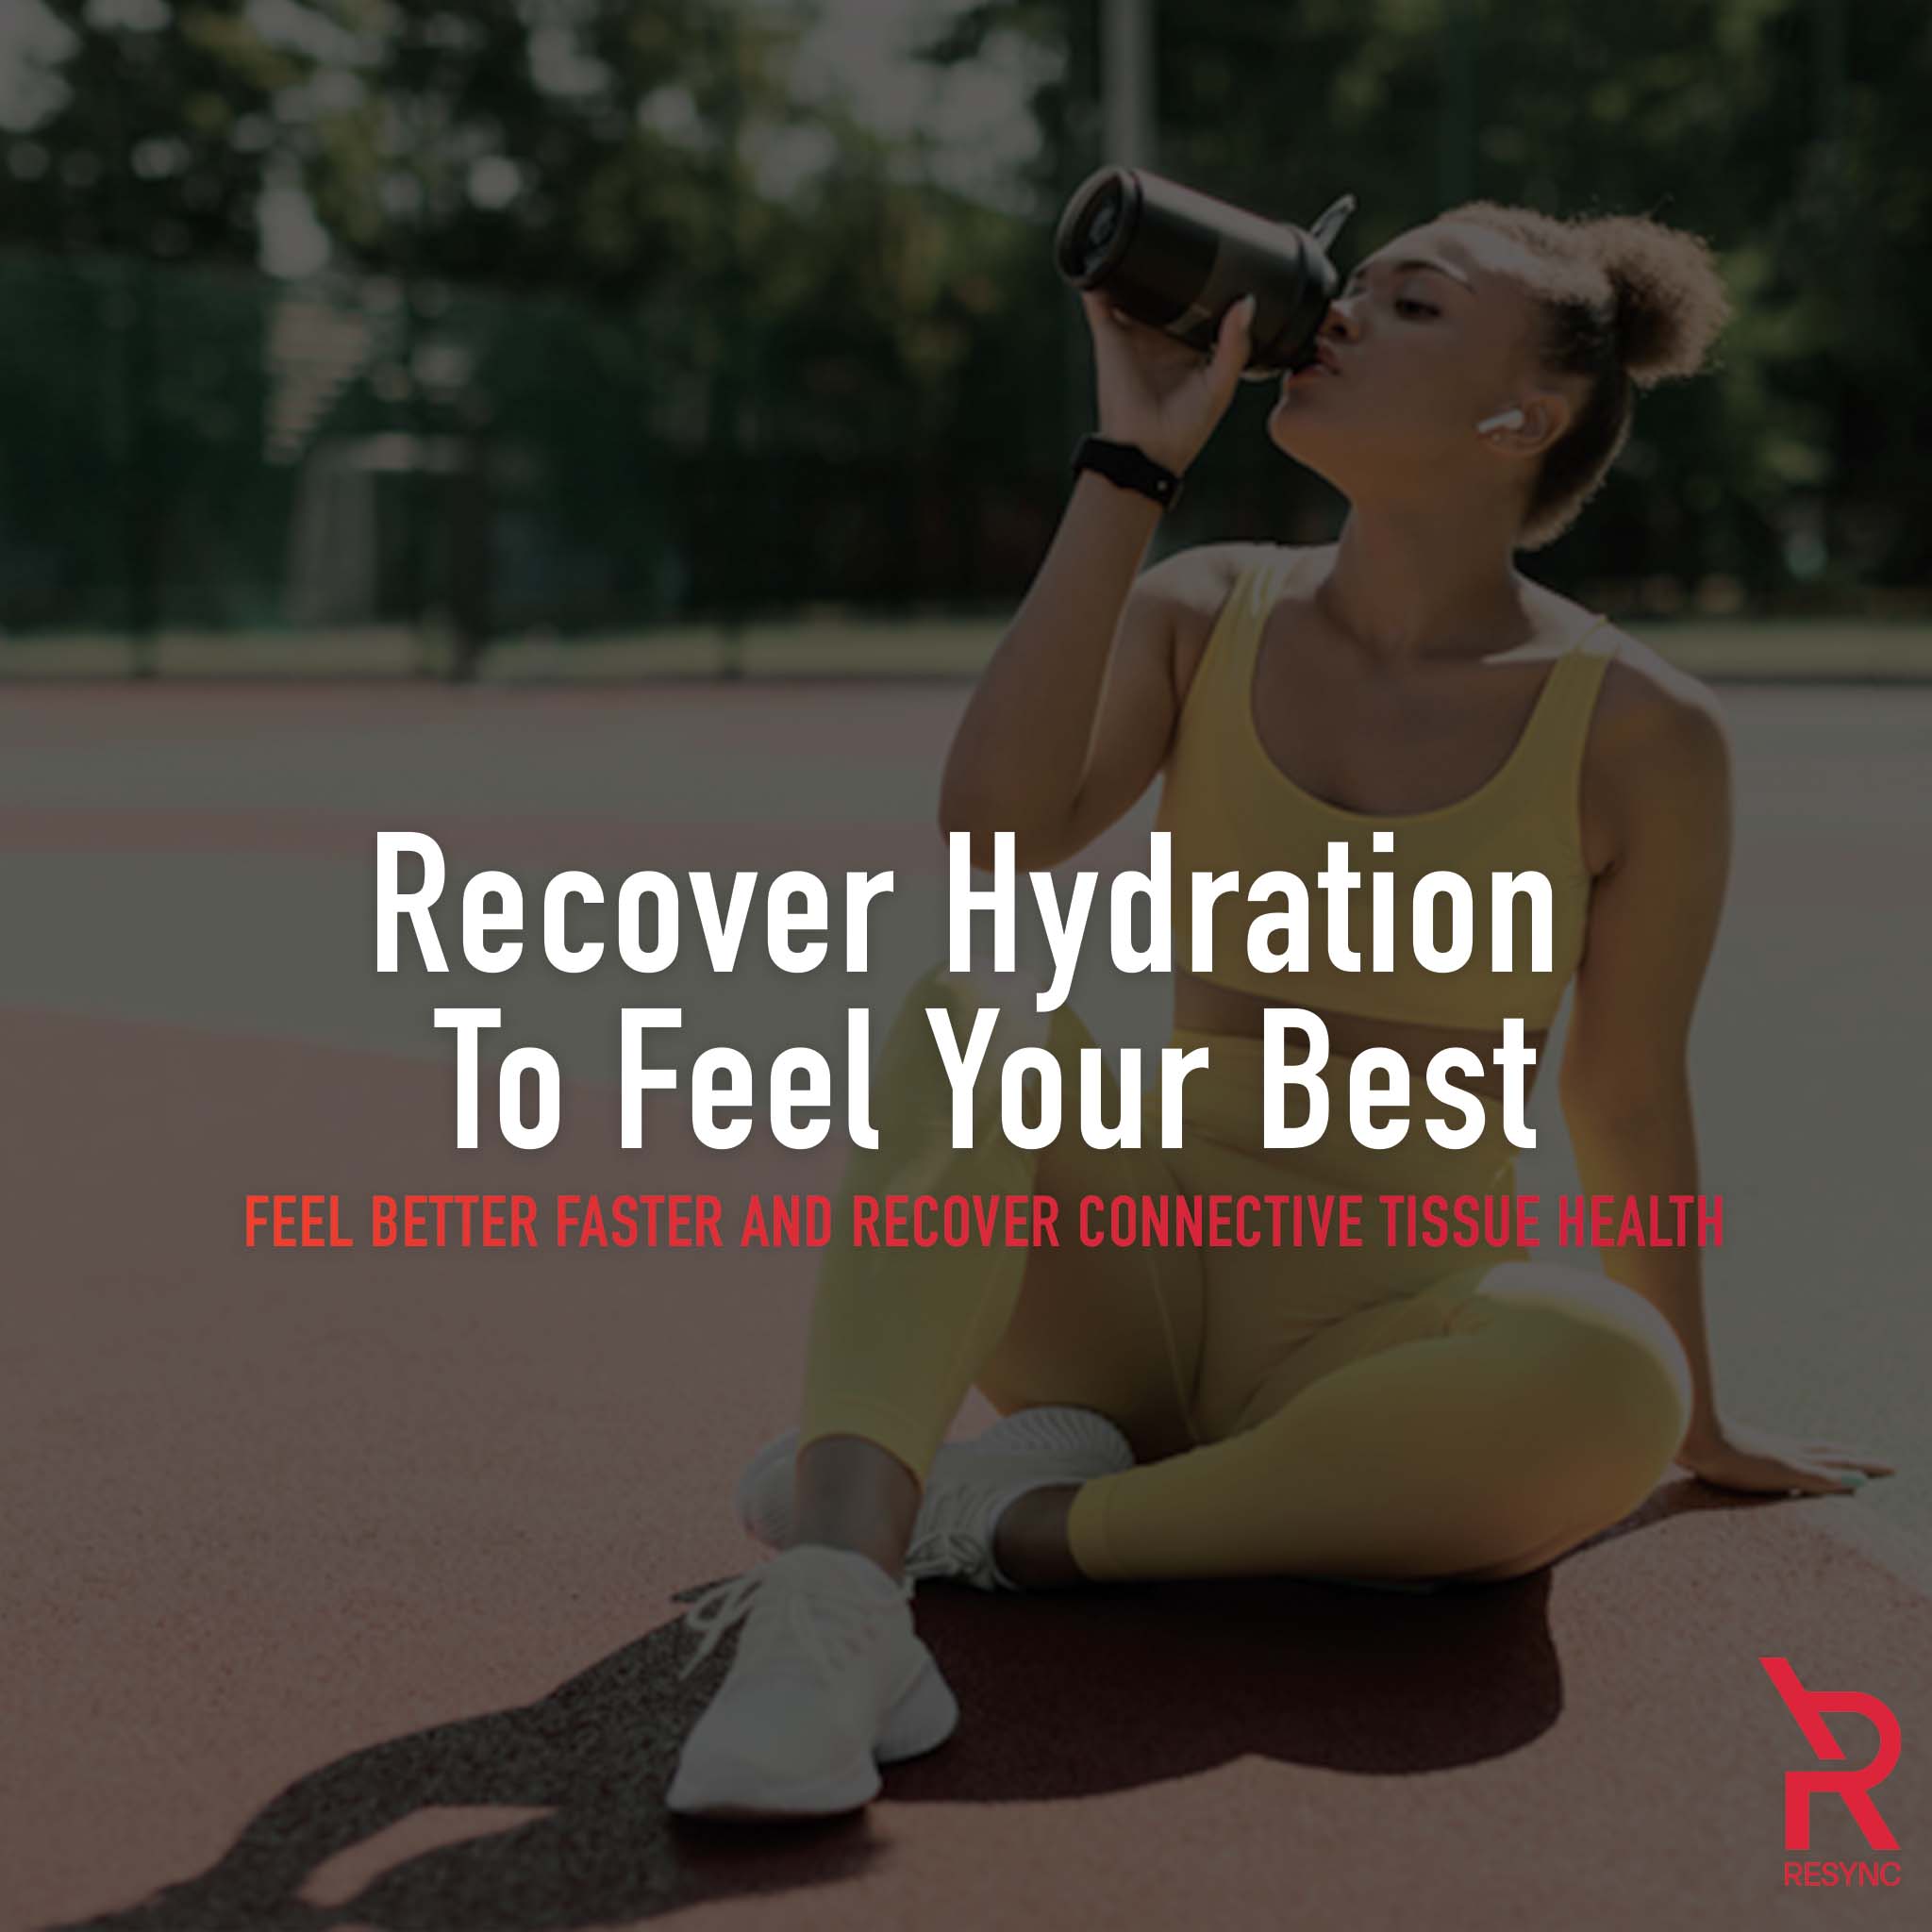 Recover Hydration To Feel Your Best